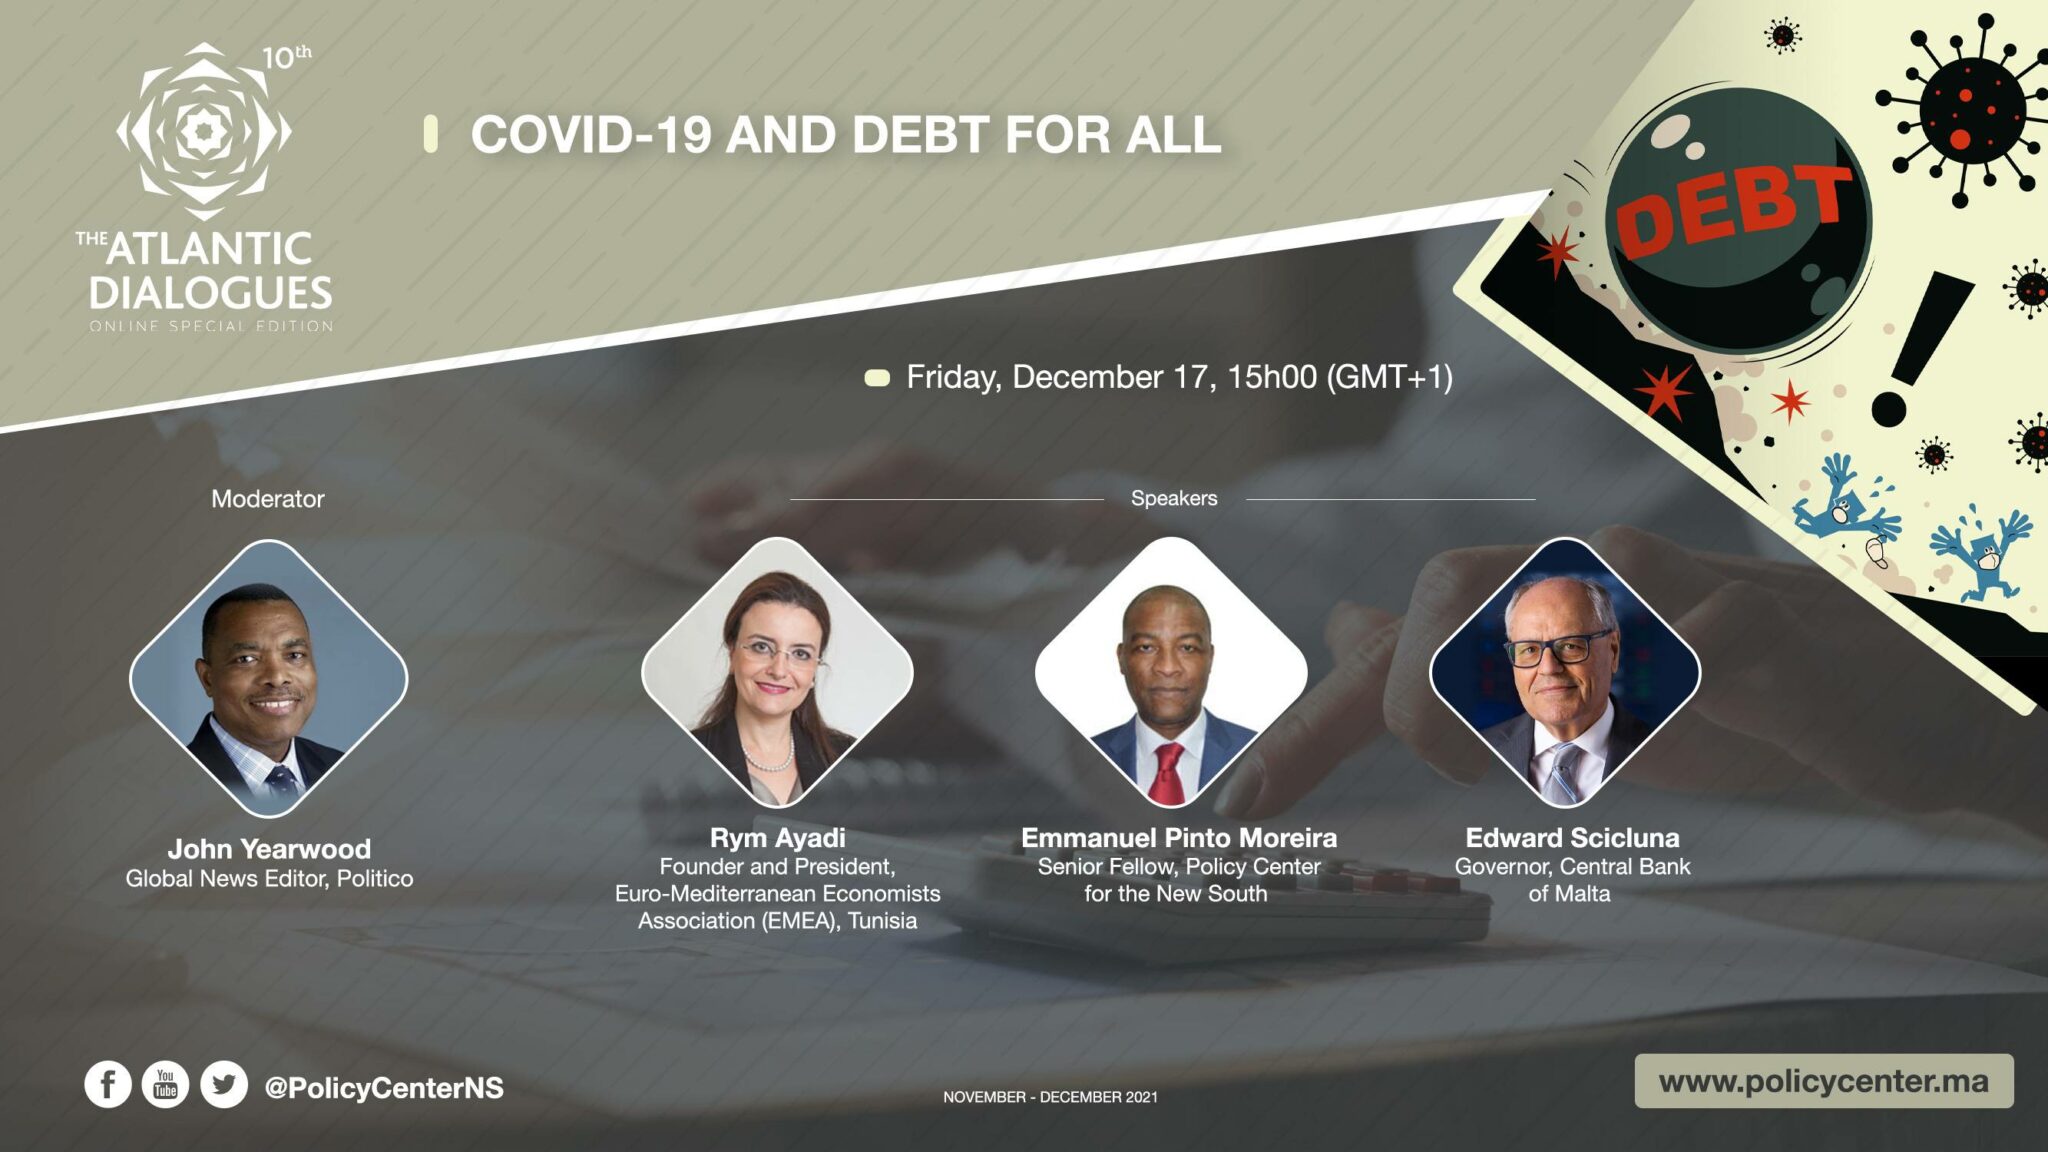 AD 2021: Covid-19 and Debt for All